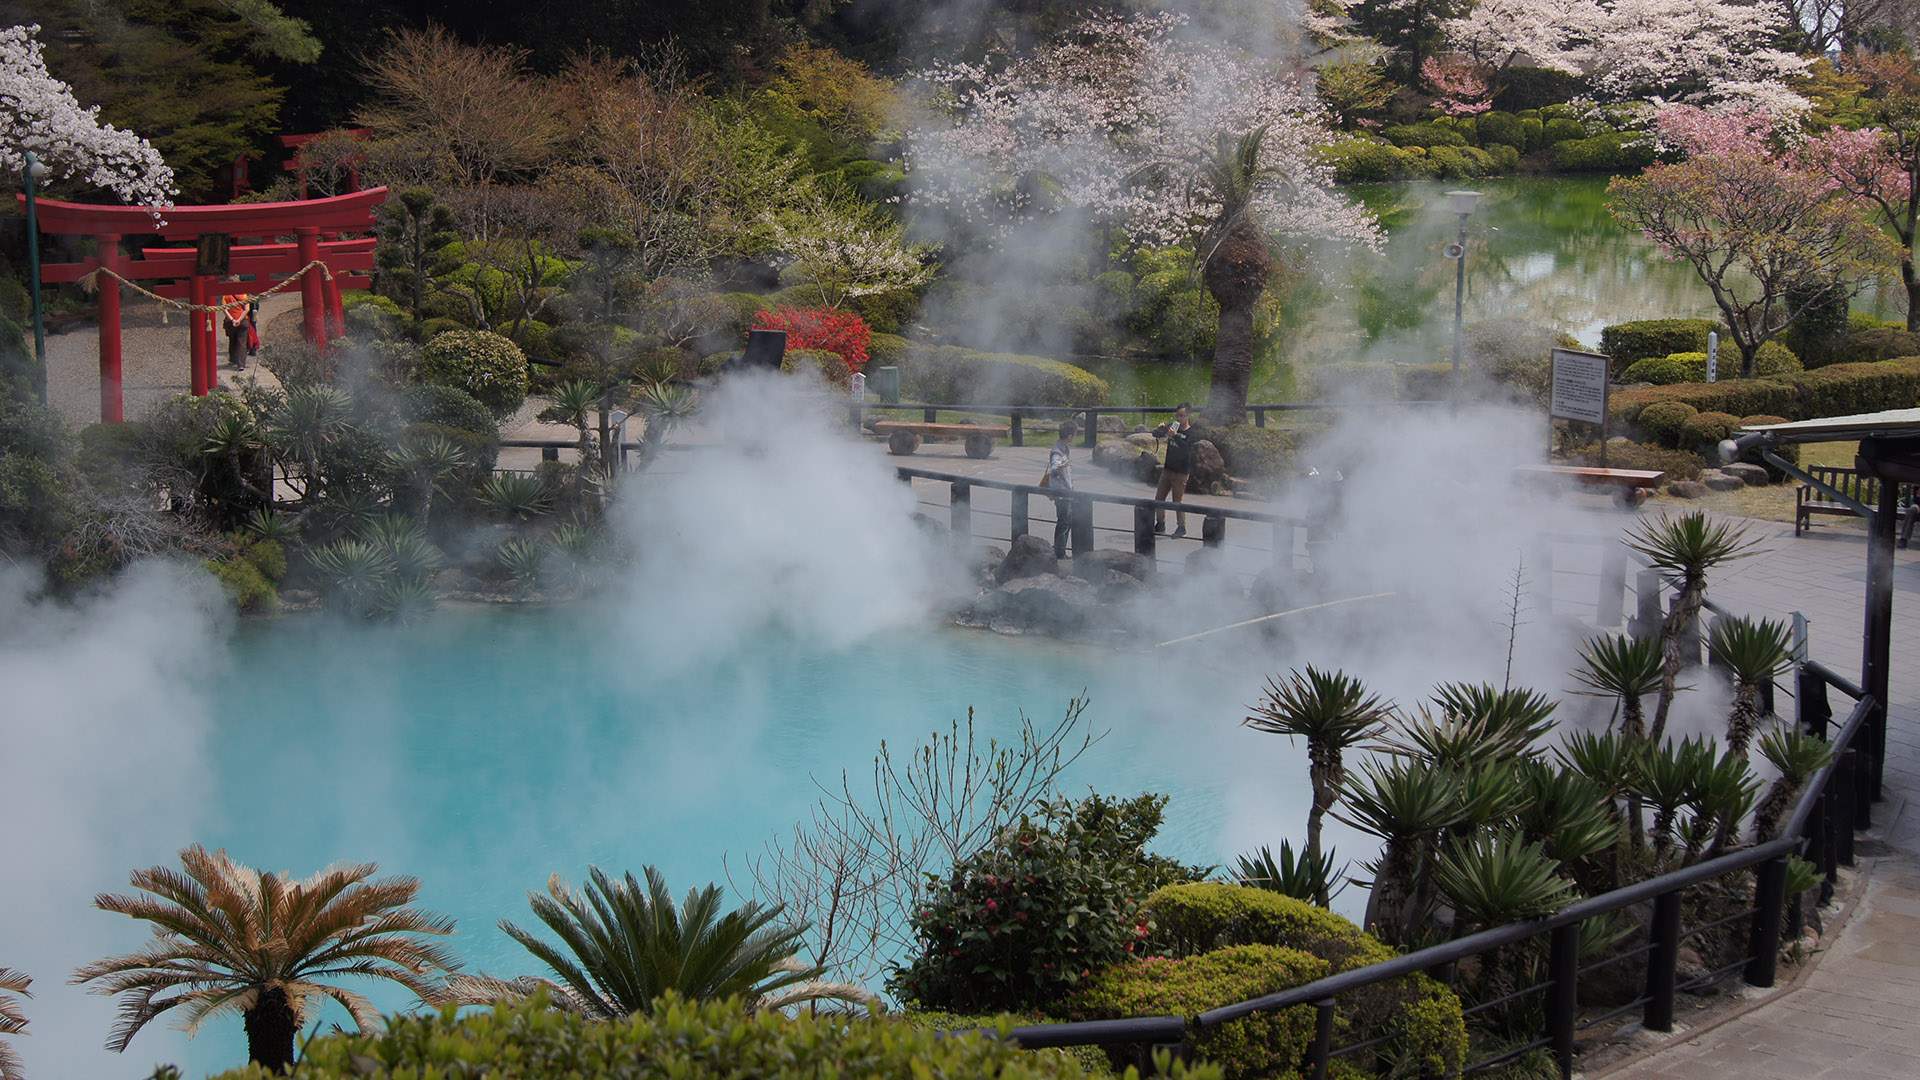 A Hot Tub Amusement Park Popped Up in Japan